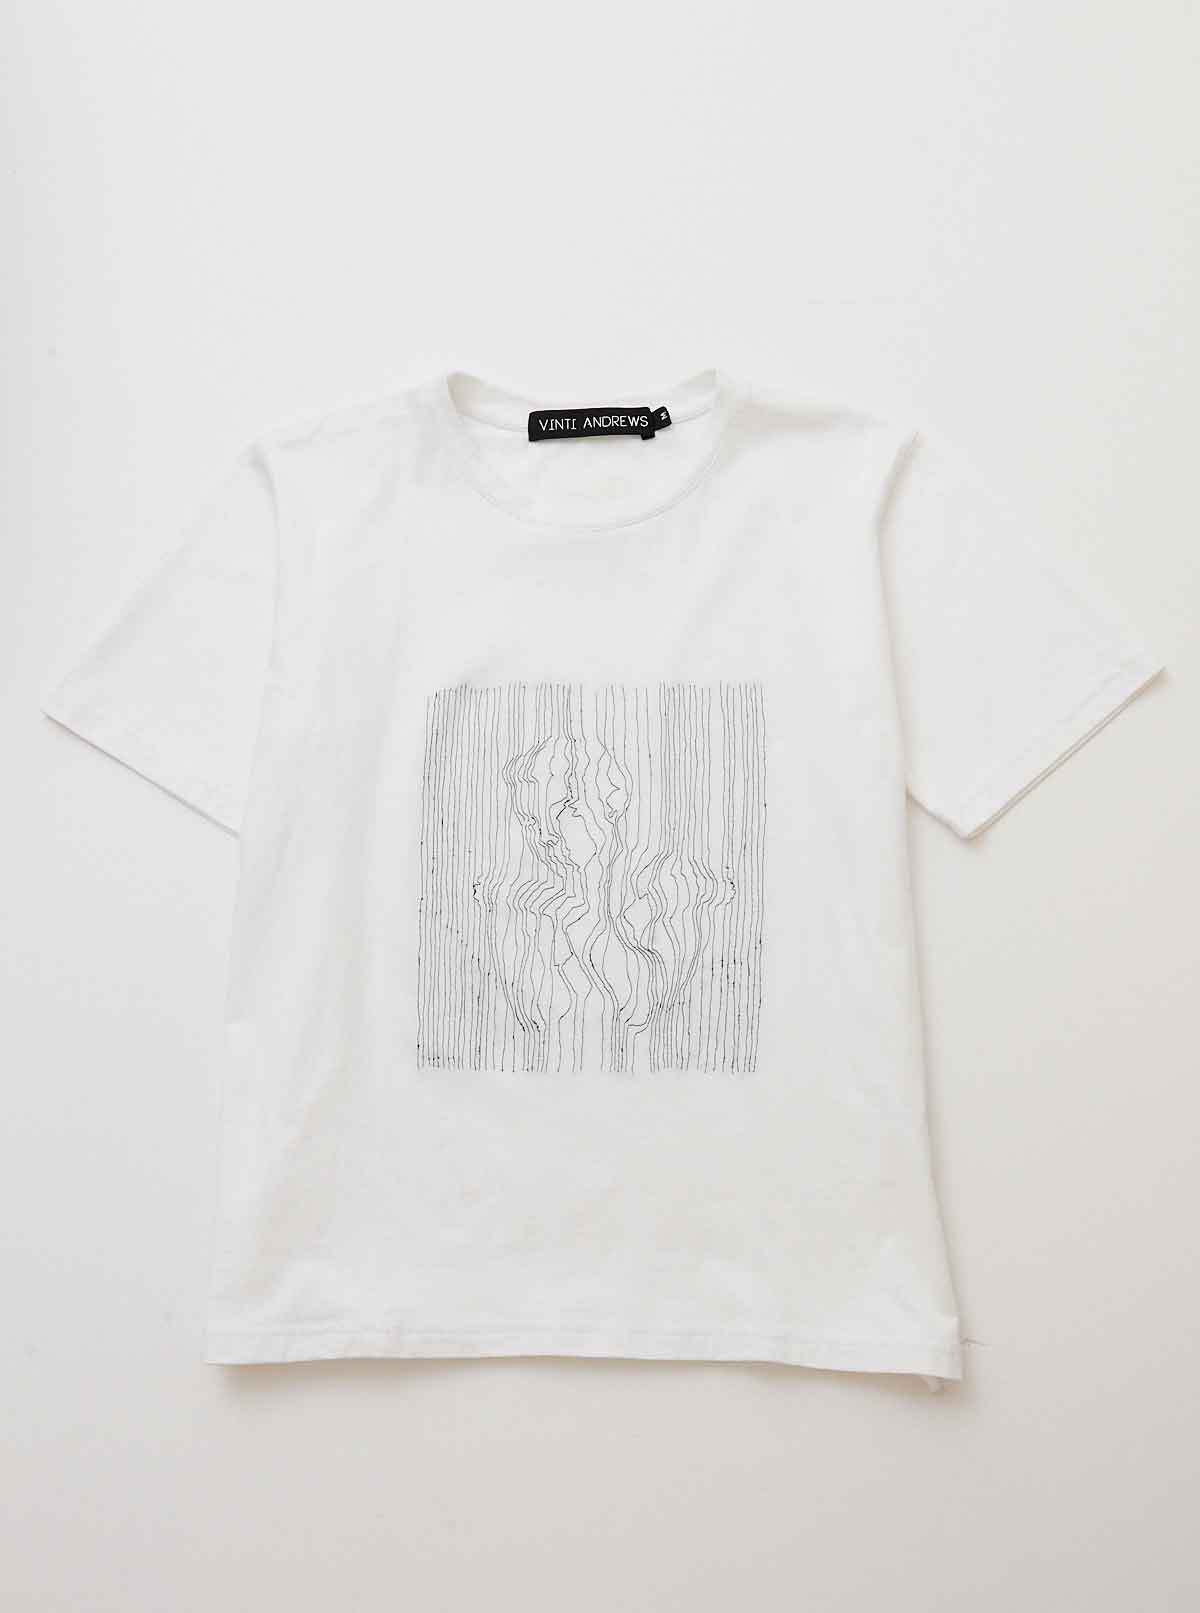 Vinti Andrews Embroidery Body Line T-Shirt